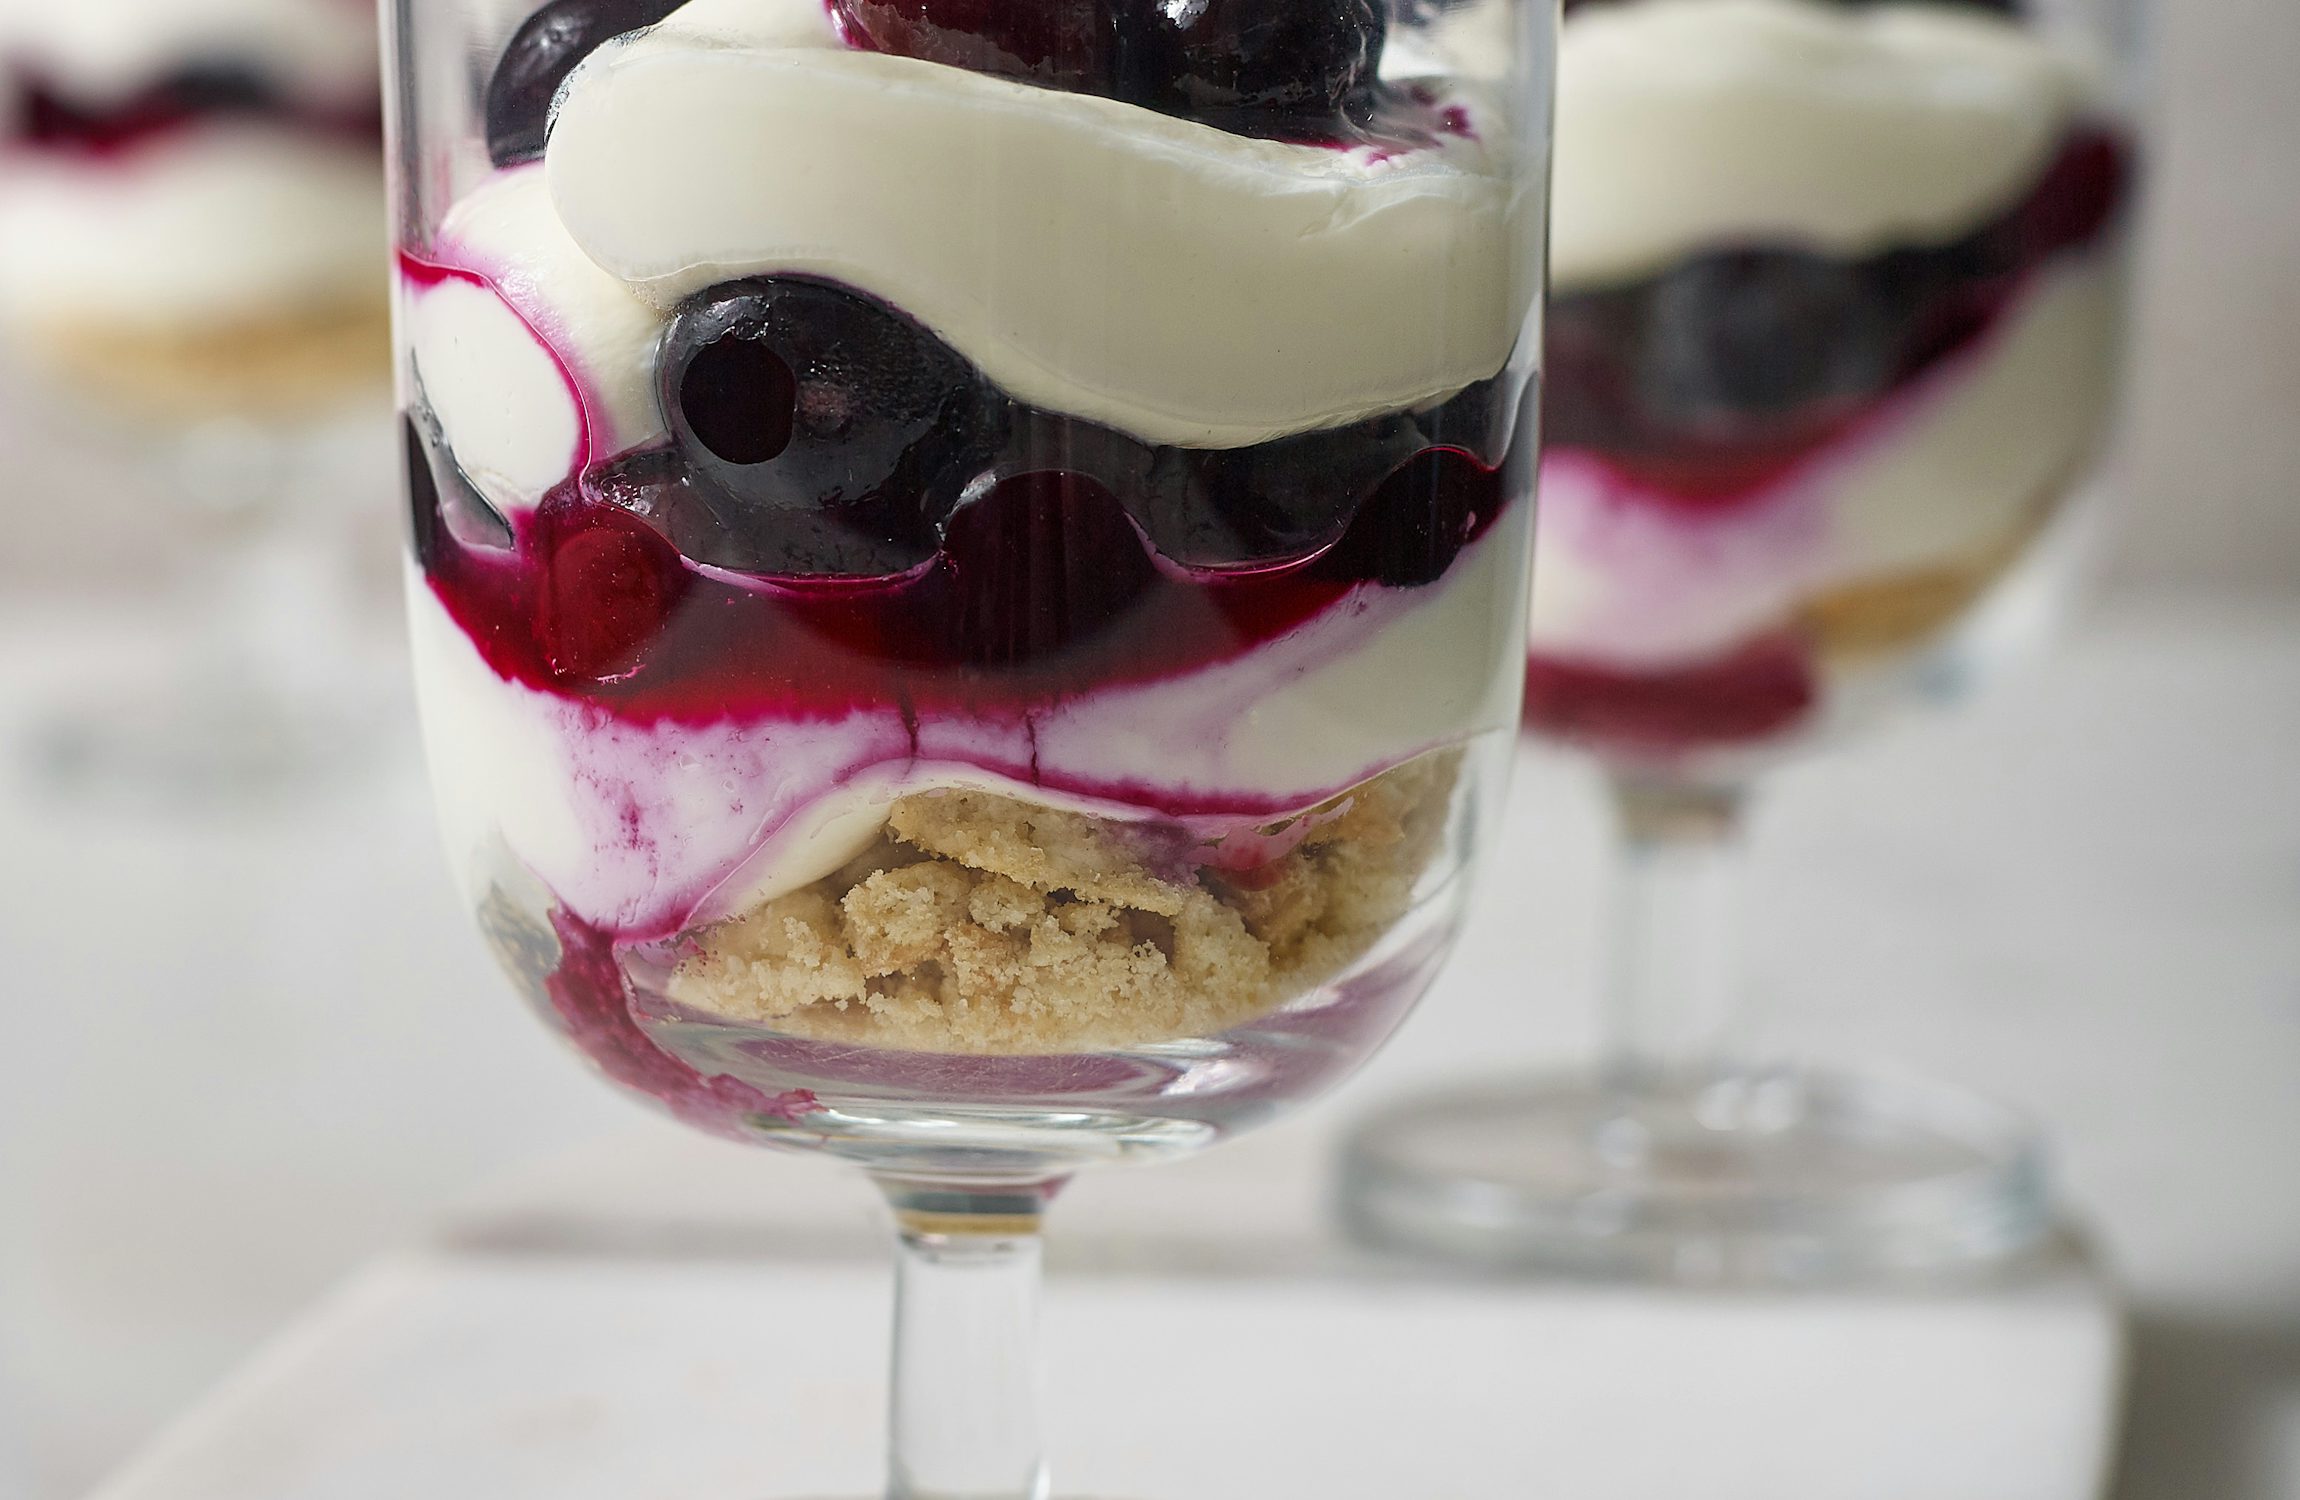 Low Fat Blueberry Cheesecake Layer